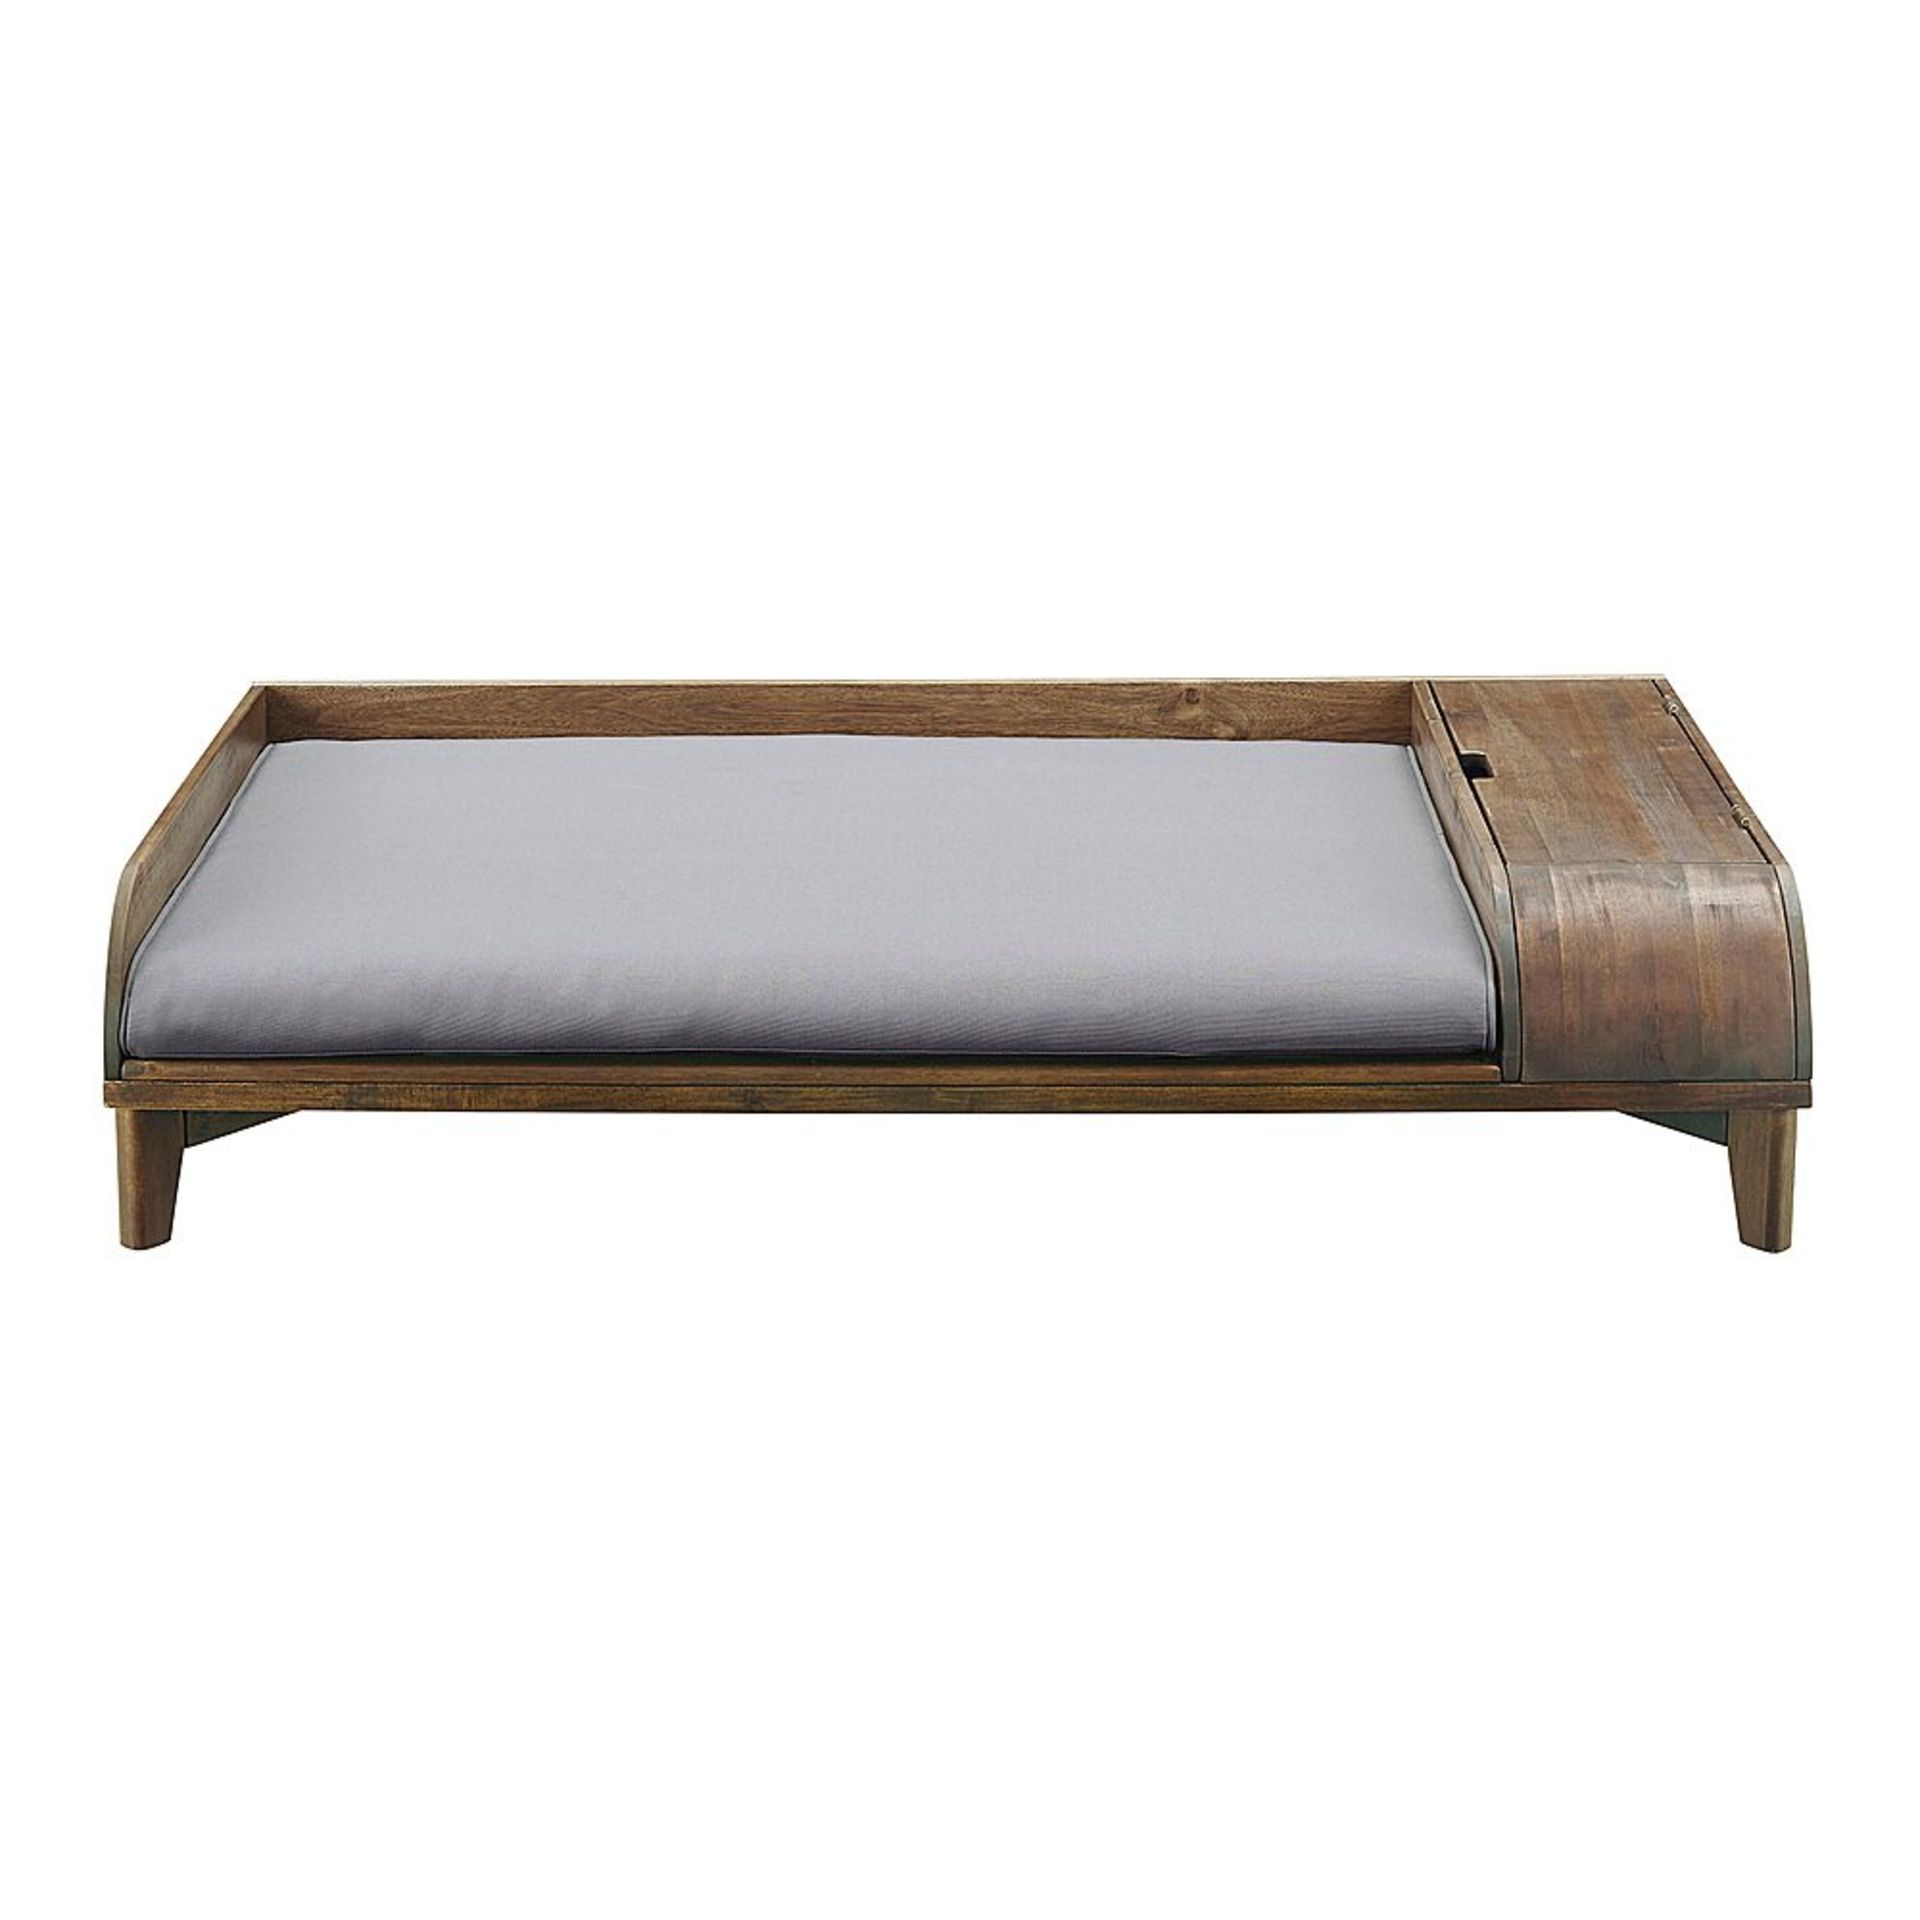 SOLID WOOD STORAGE PED BED WITH CUSHION IN DARK BROWN/GREY - RRP £245 - Image 5 of 7